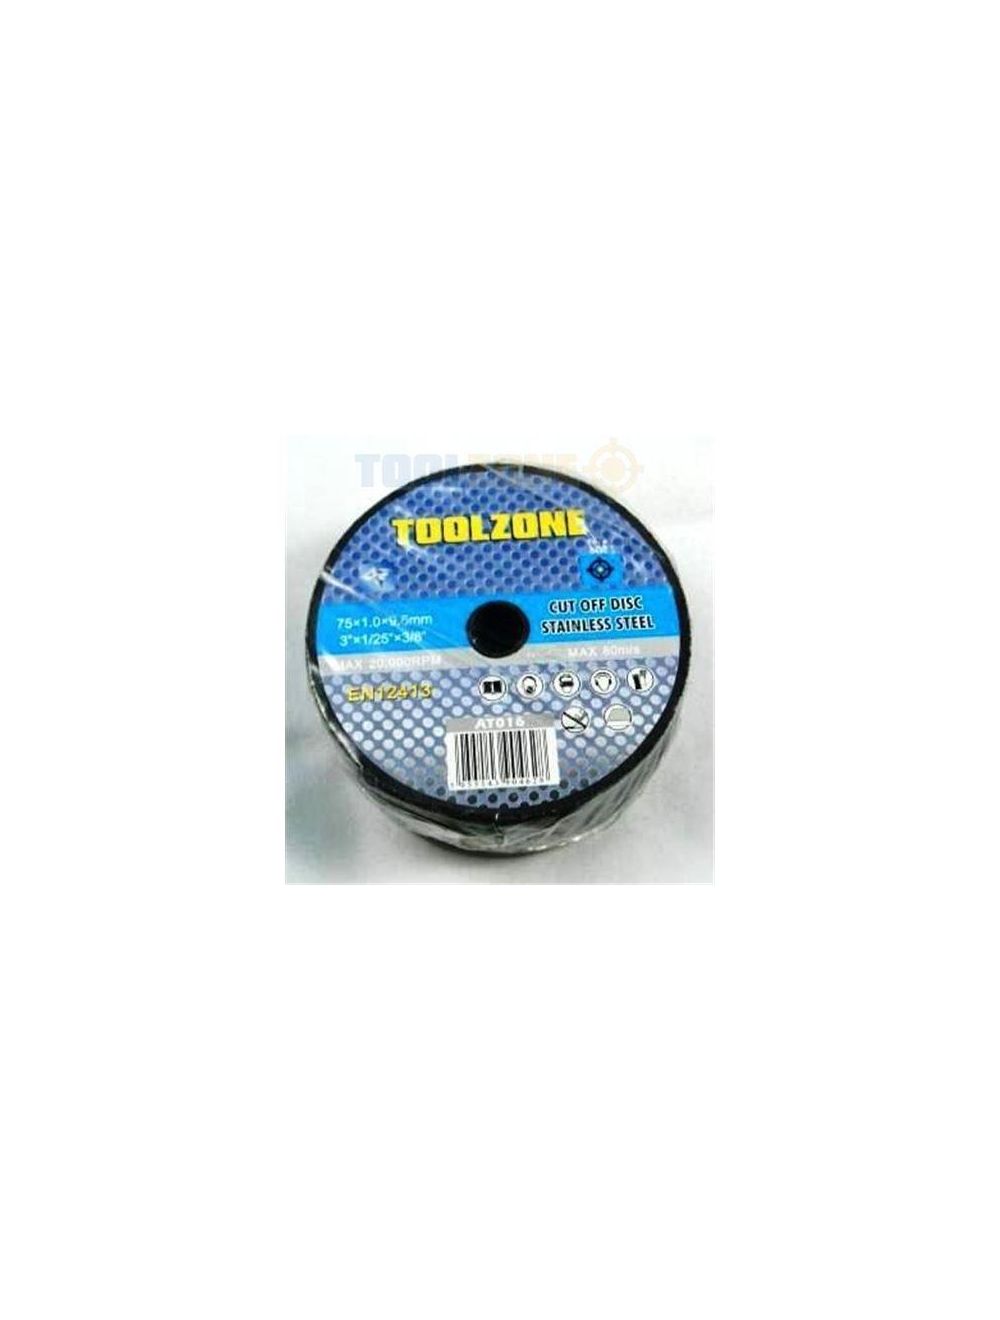 25 X 3 ULTRA THIN CUTTING DISCS FOR AIR CUT OFF TOOL by Toolzone 